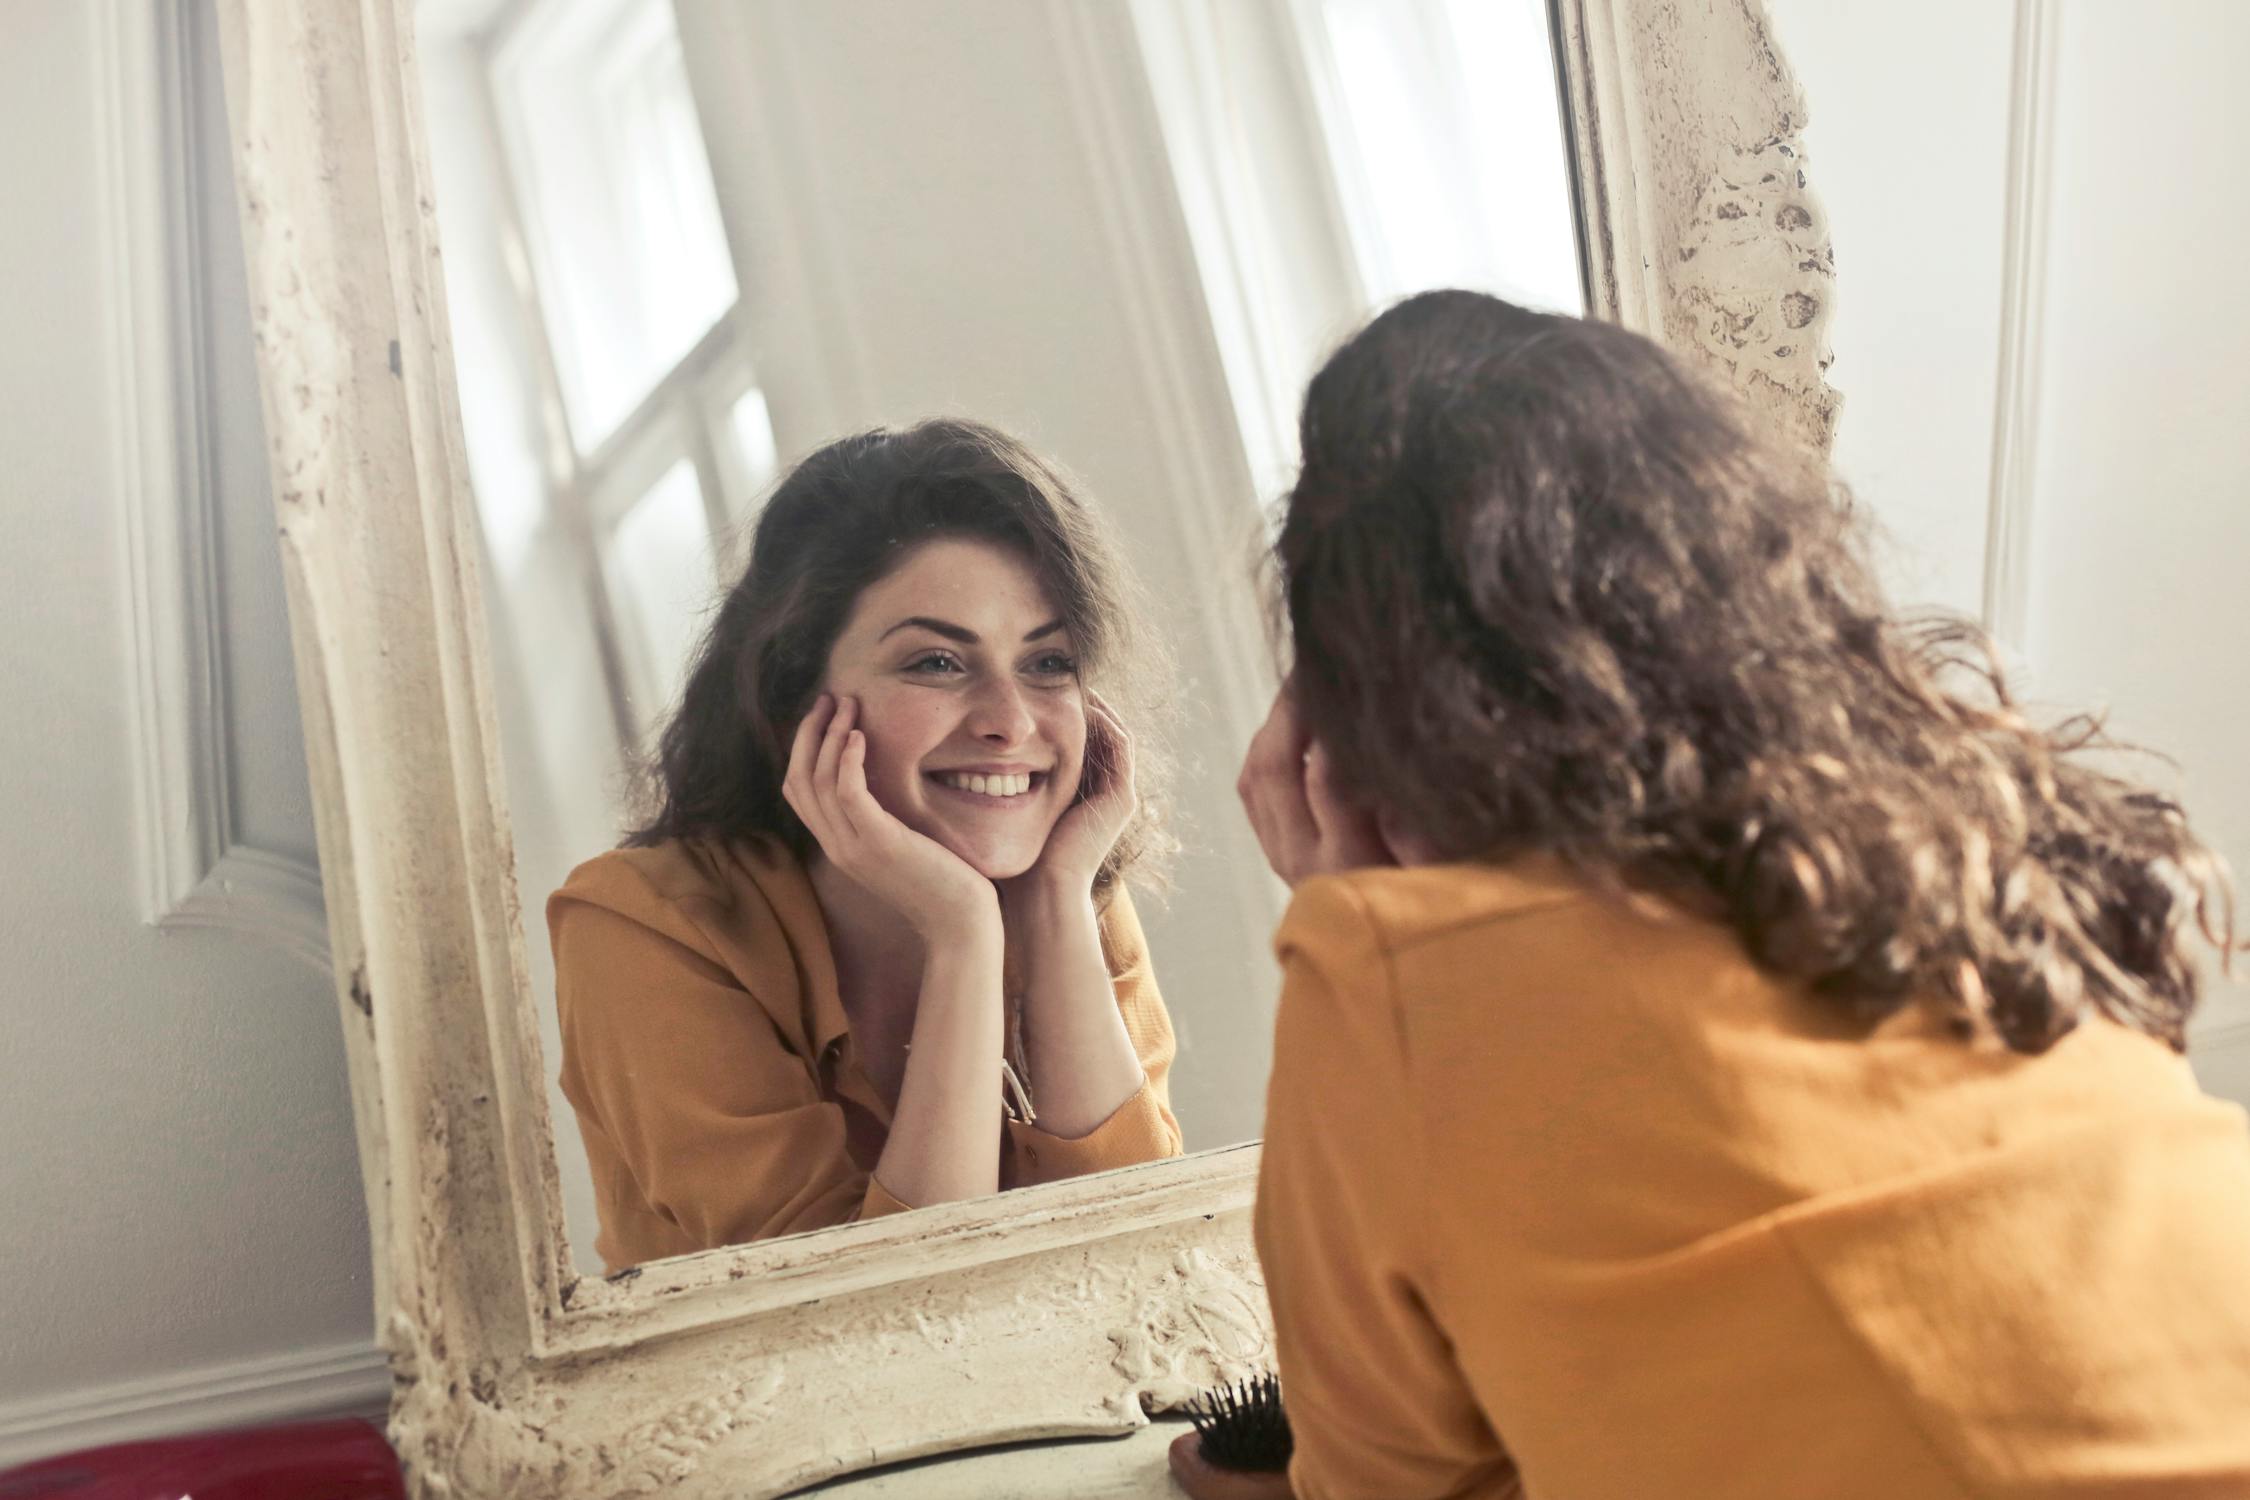 Beautiful Face Photo by Andrea Piacquadio from Pexels: https://www.pexels.com/photo/photo-of-woman-looking-at-the-mirror-774866/